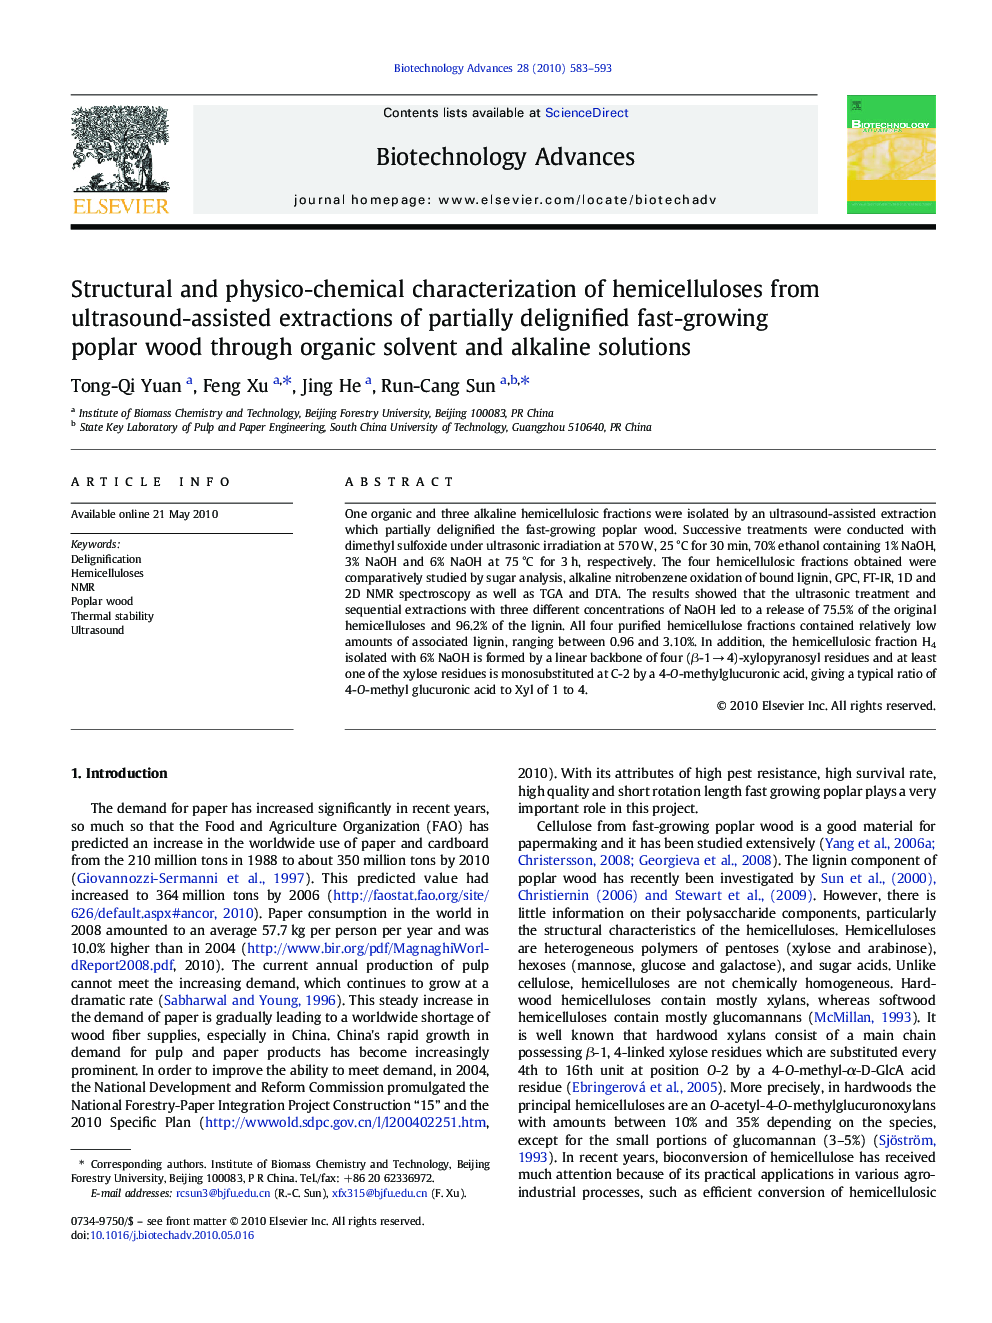 Structural and physico-chemical characterization of hemicelluloses from ultrasound-assisted extractions of partially delignified fast-growing poplar wood through organic solvent and alkaline solutions